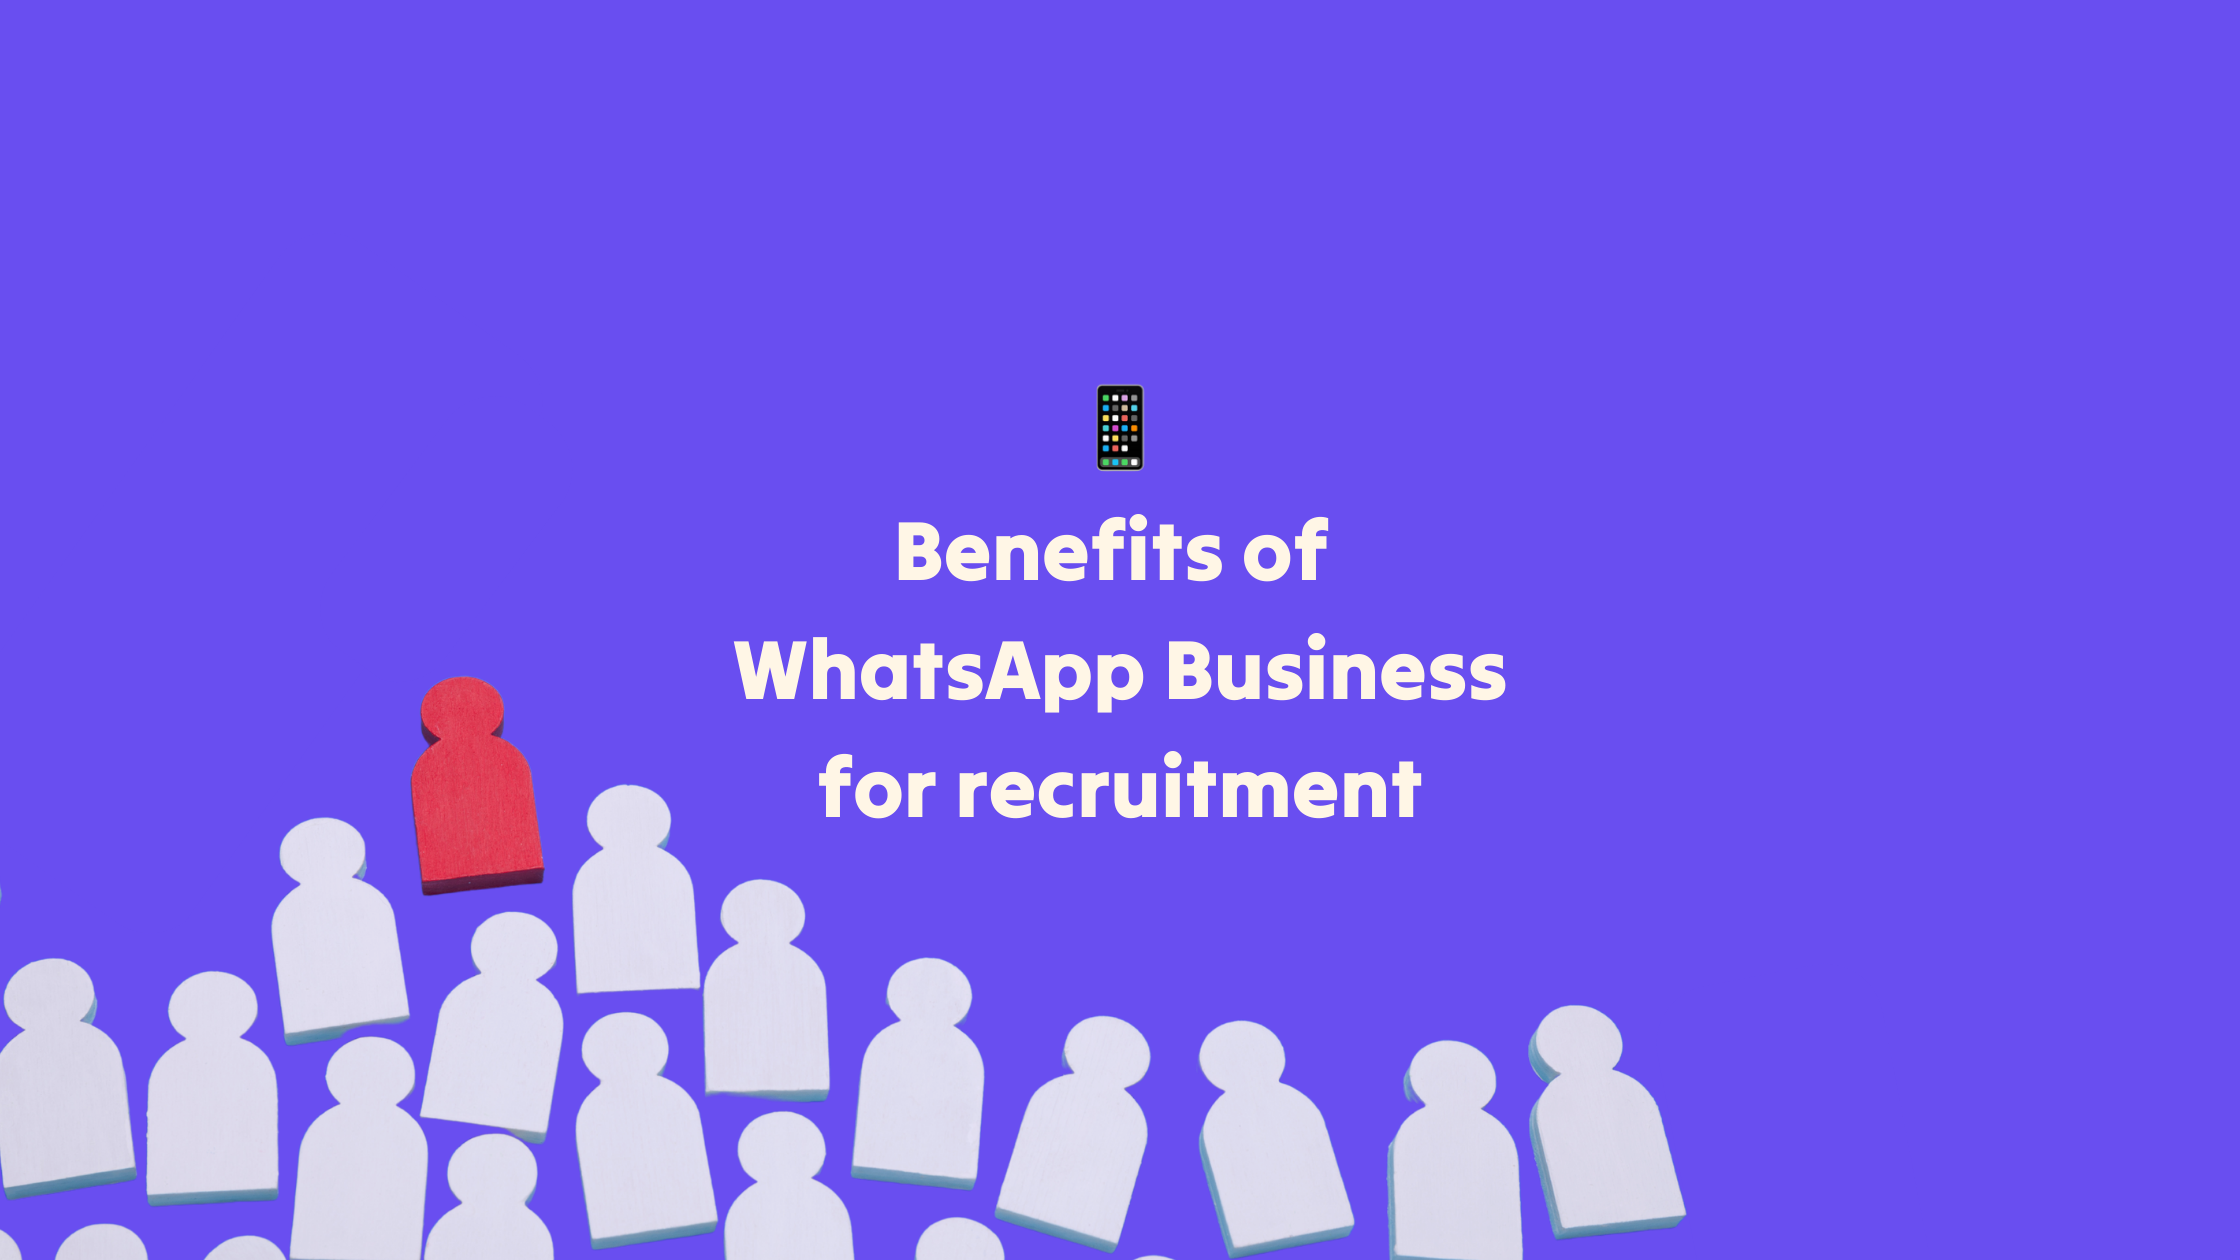 Purple background with images of white people user icons in the lower left corner and one user icon is red. TItle in white saying Benefits of WhatsApp Business for Recruitment. A phone emoji above the title.